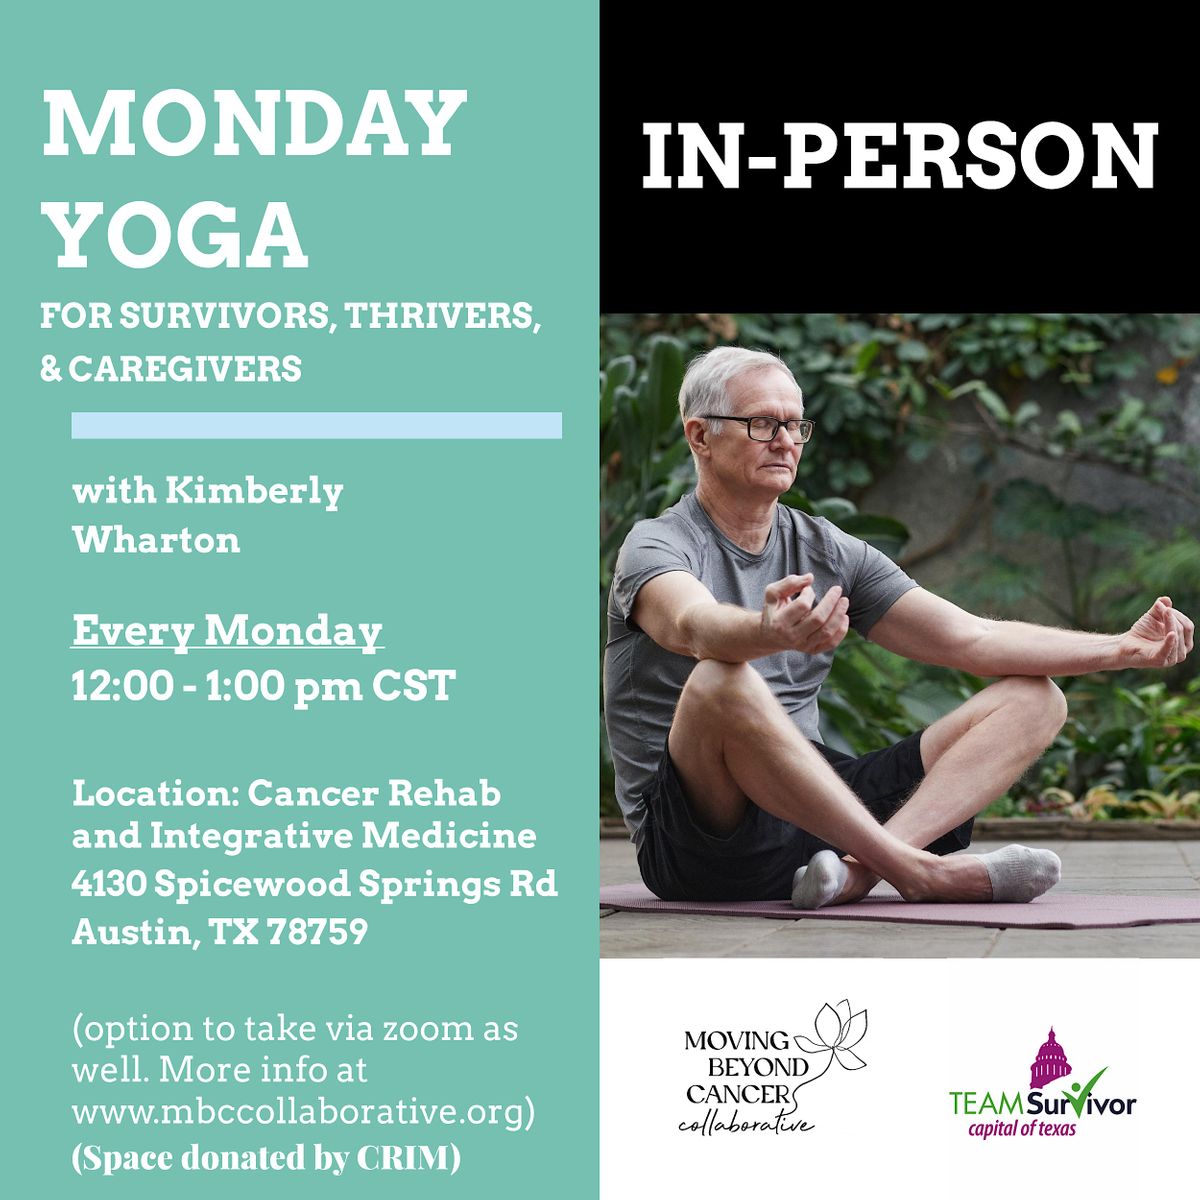 IN-PERSON Monday Yoga for Survivors, Thrivers, and Caregivers